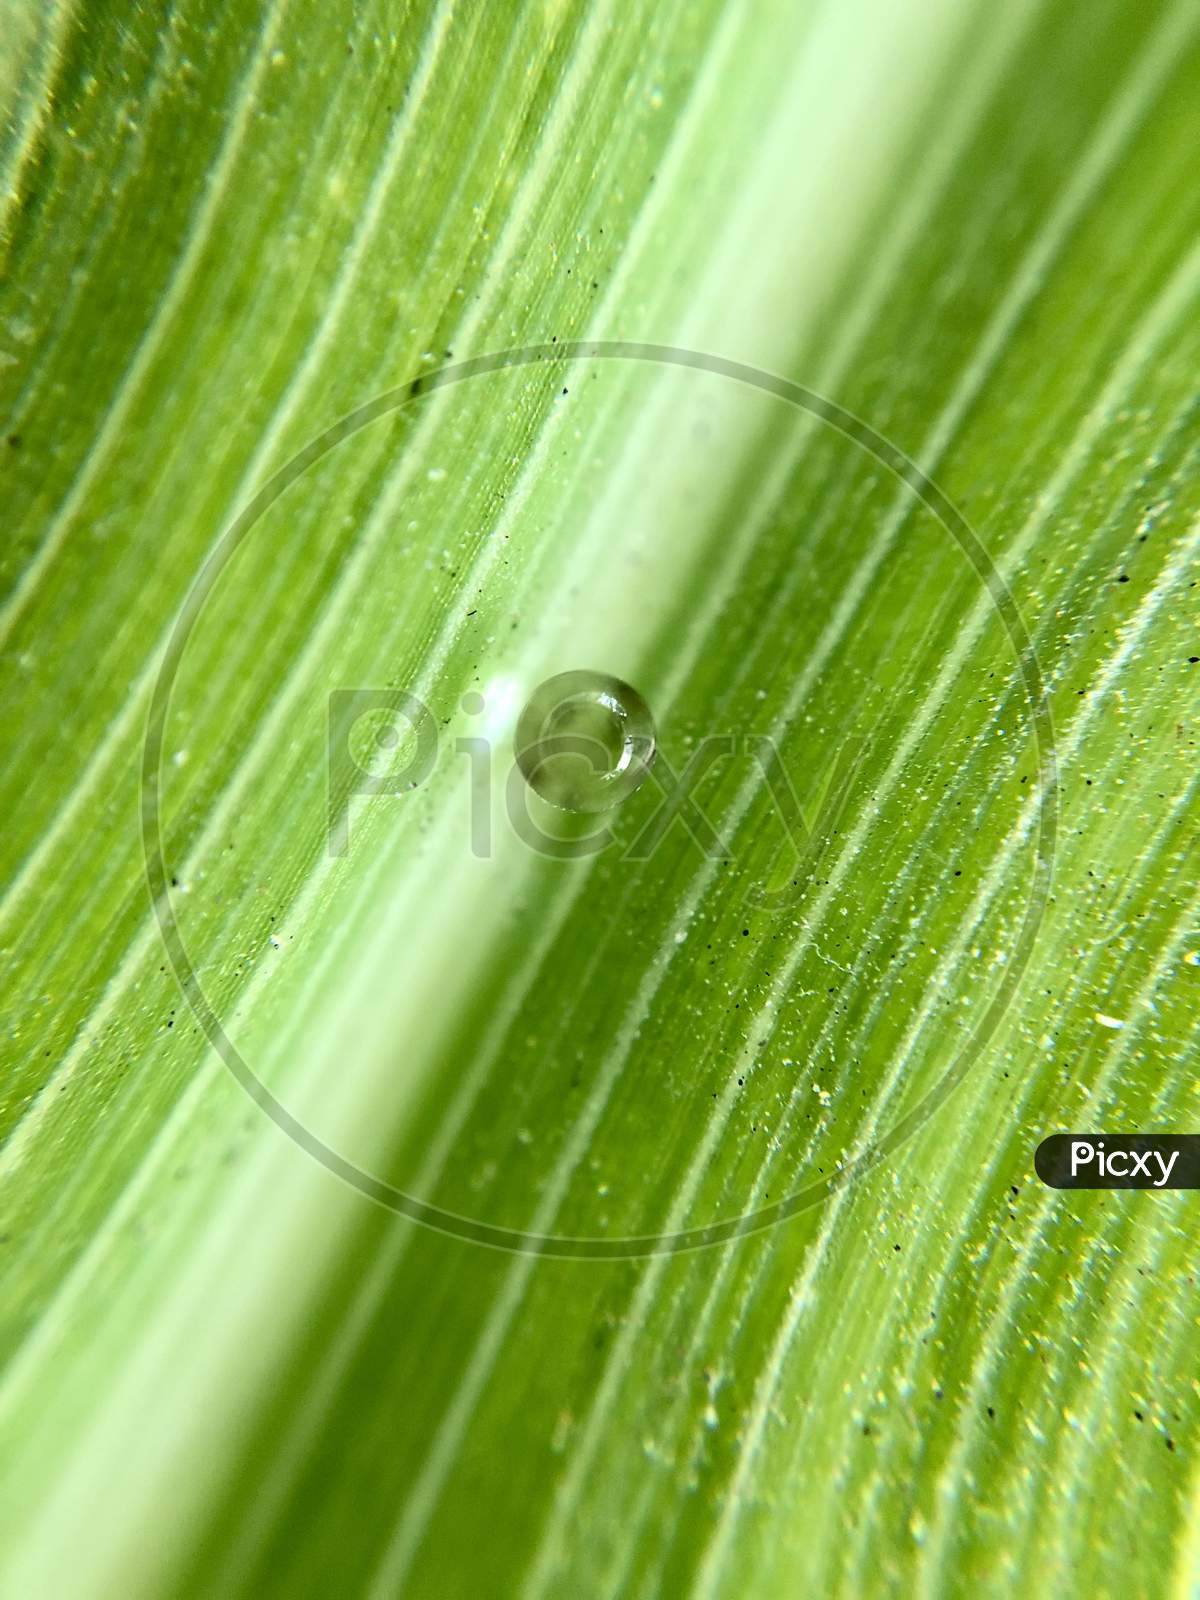 Lemon grass wallpaper with water droplet